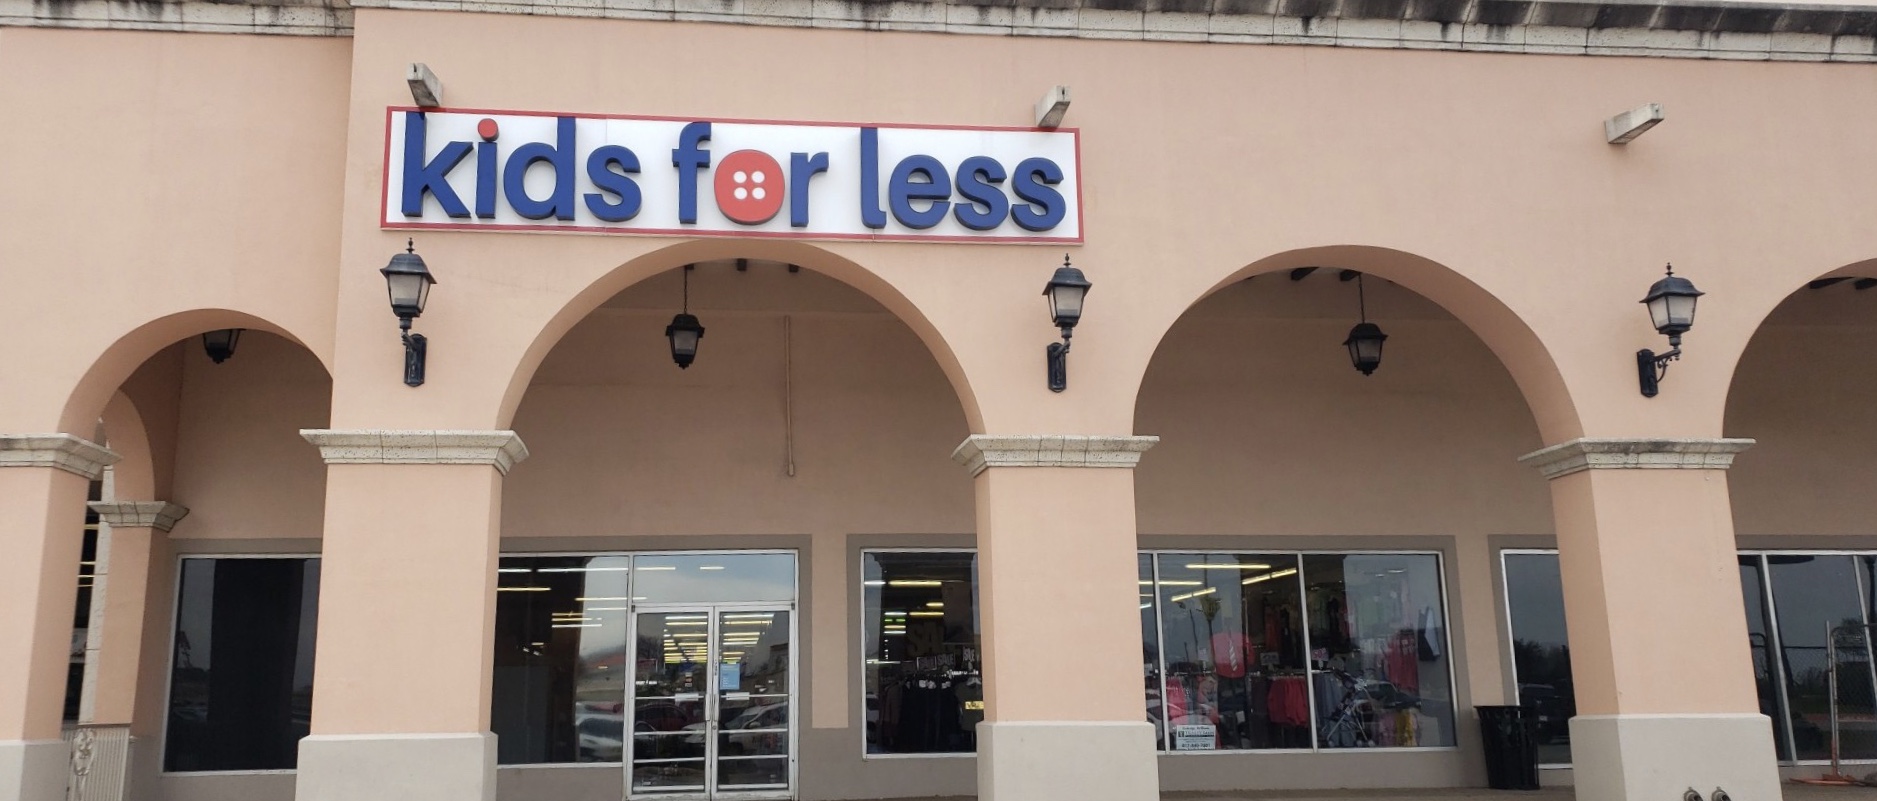 Kids for Less